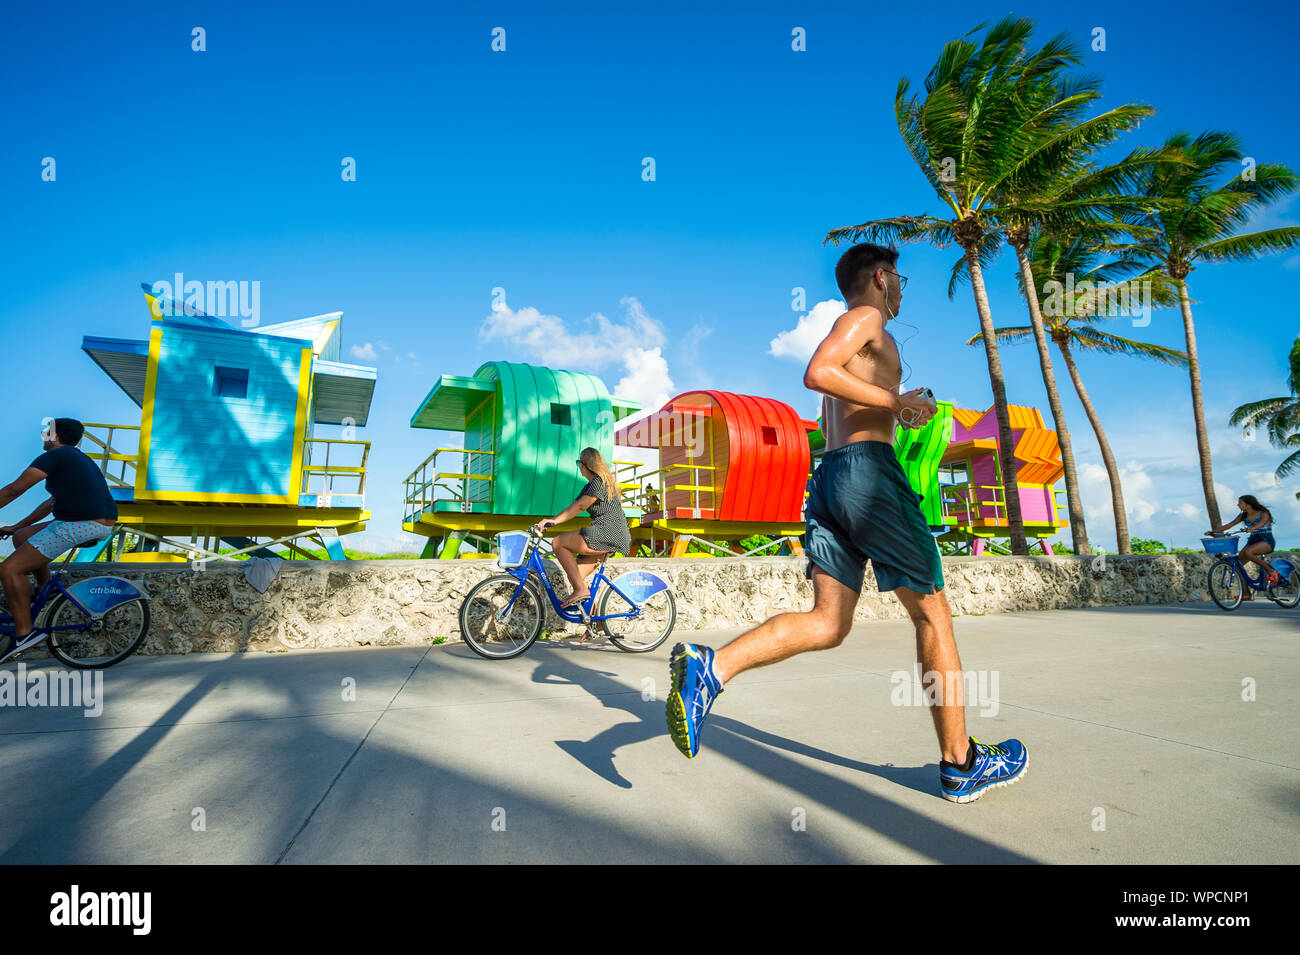 MIAMI - JULY 15, 2017: People pass along the Miami Beach promenade in front of vibrantly colored newly constructed lifeguard towers awaiting placement Stock Photo